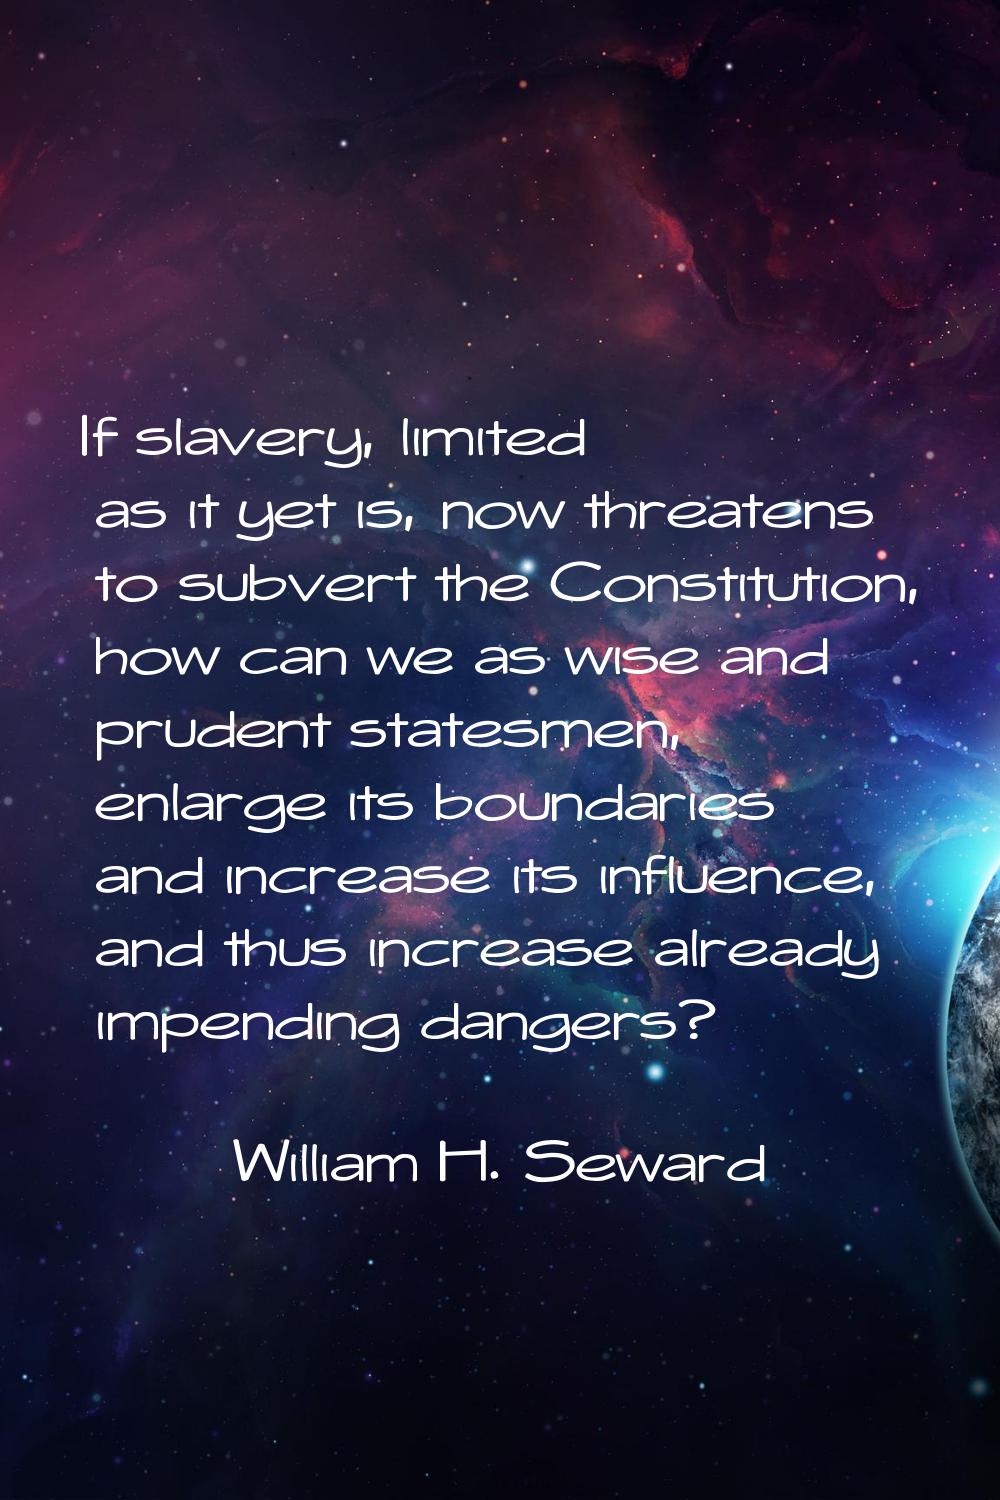 If slavery, limited as it yet is, now threatens to subvert the Constitution, how can we as wise and